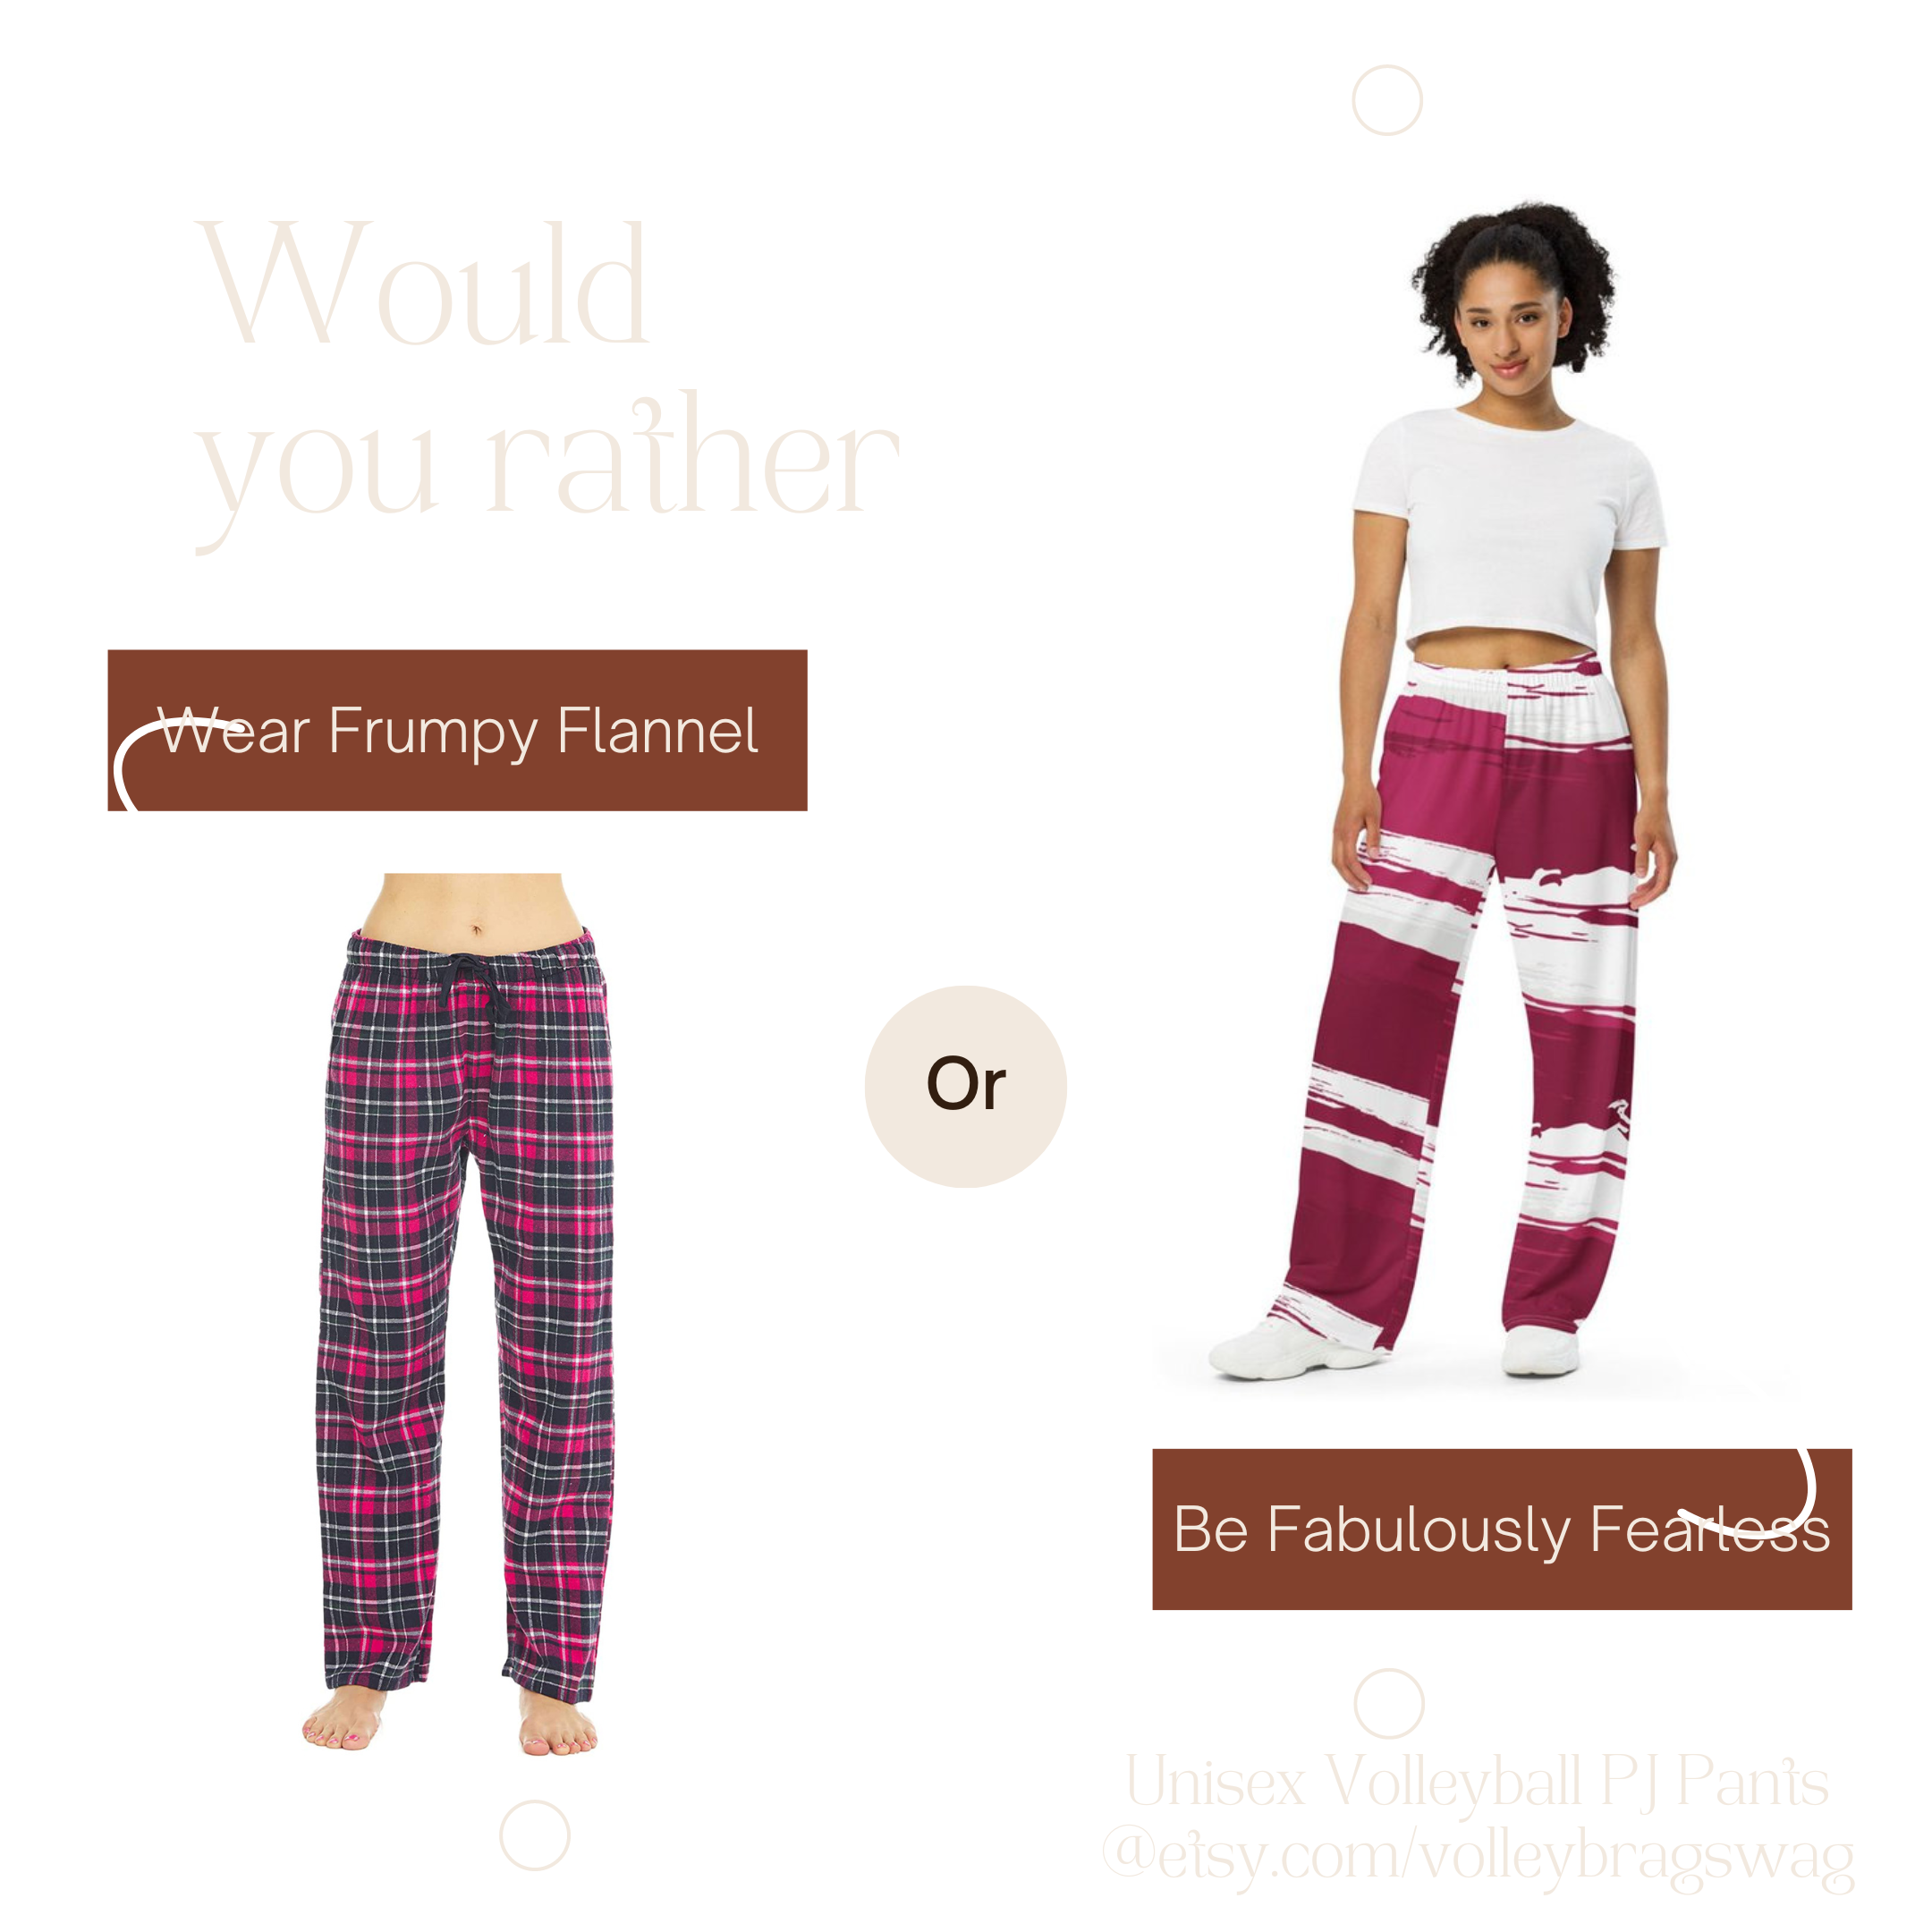 Good Bye To Flannel Volleyball Pants Hello To New Volleyball PJ Pants: These Qatar flag inspired maroon and white wide leg athletic pants are available now on Etsy.